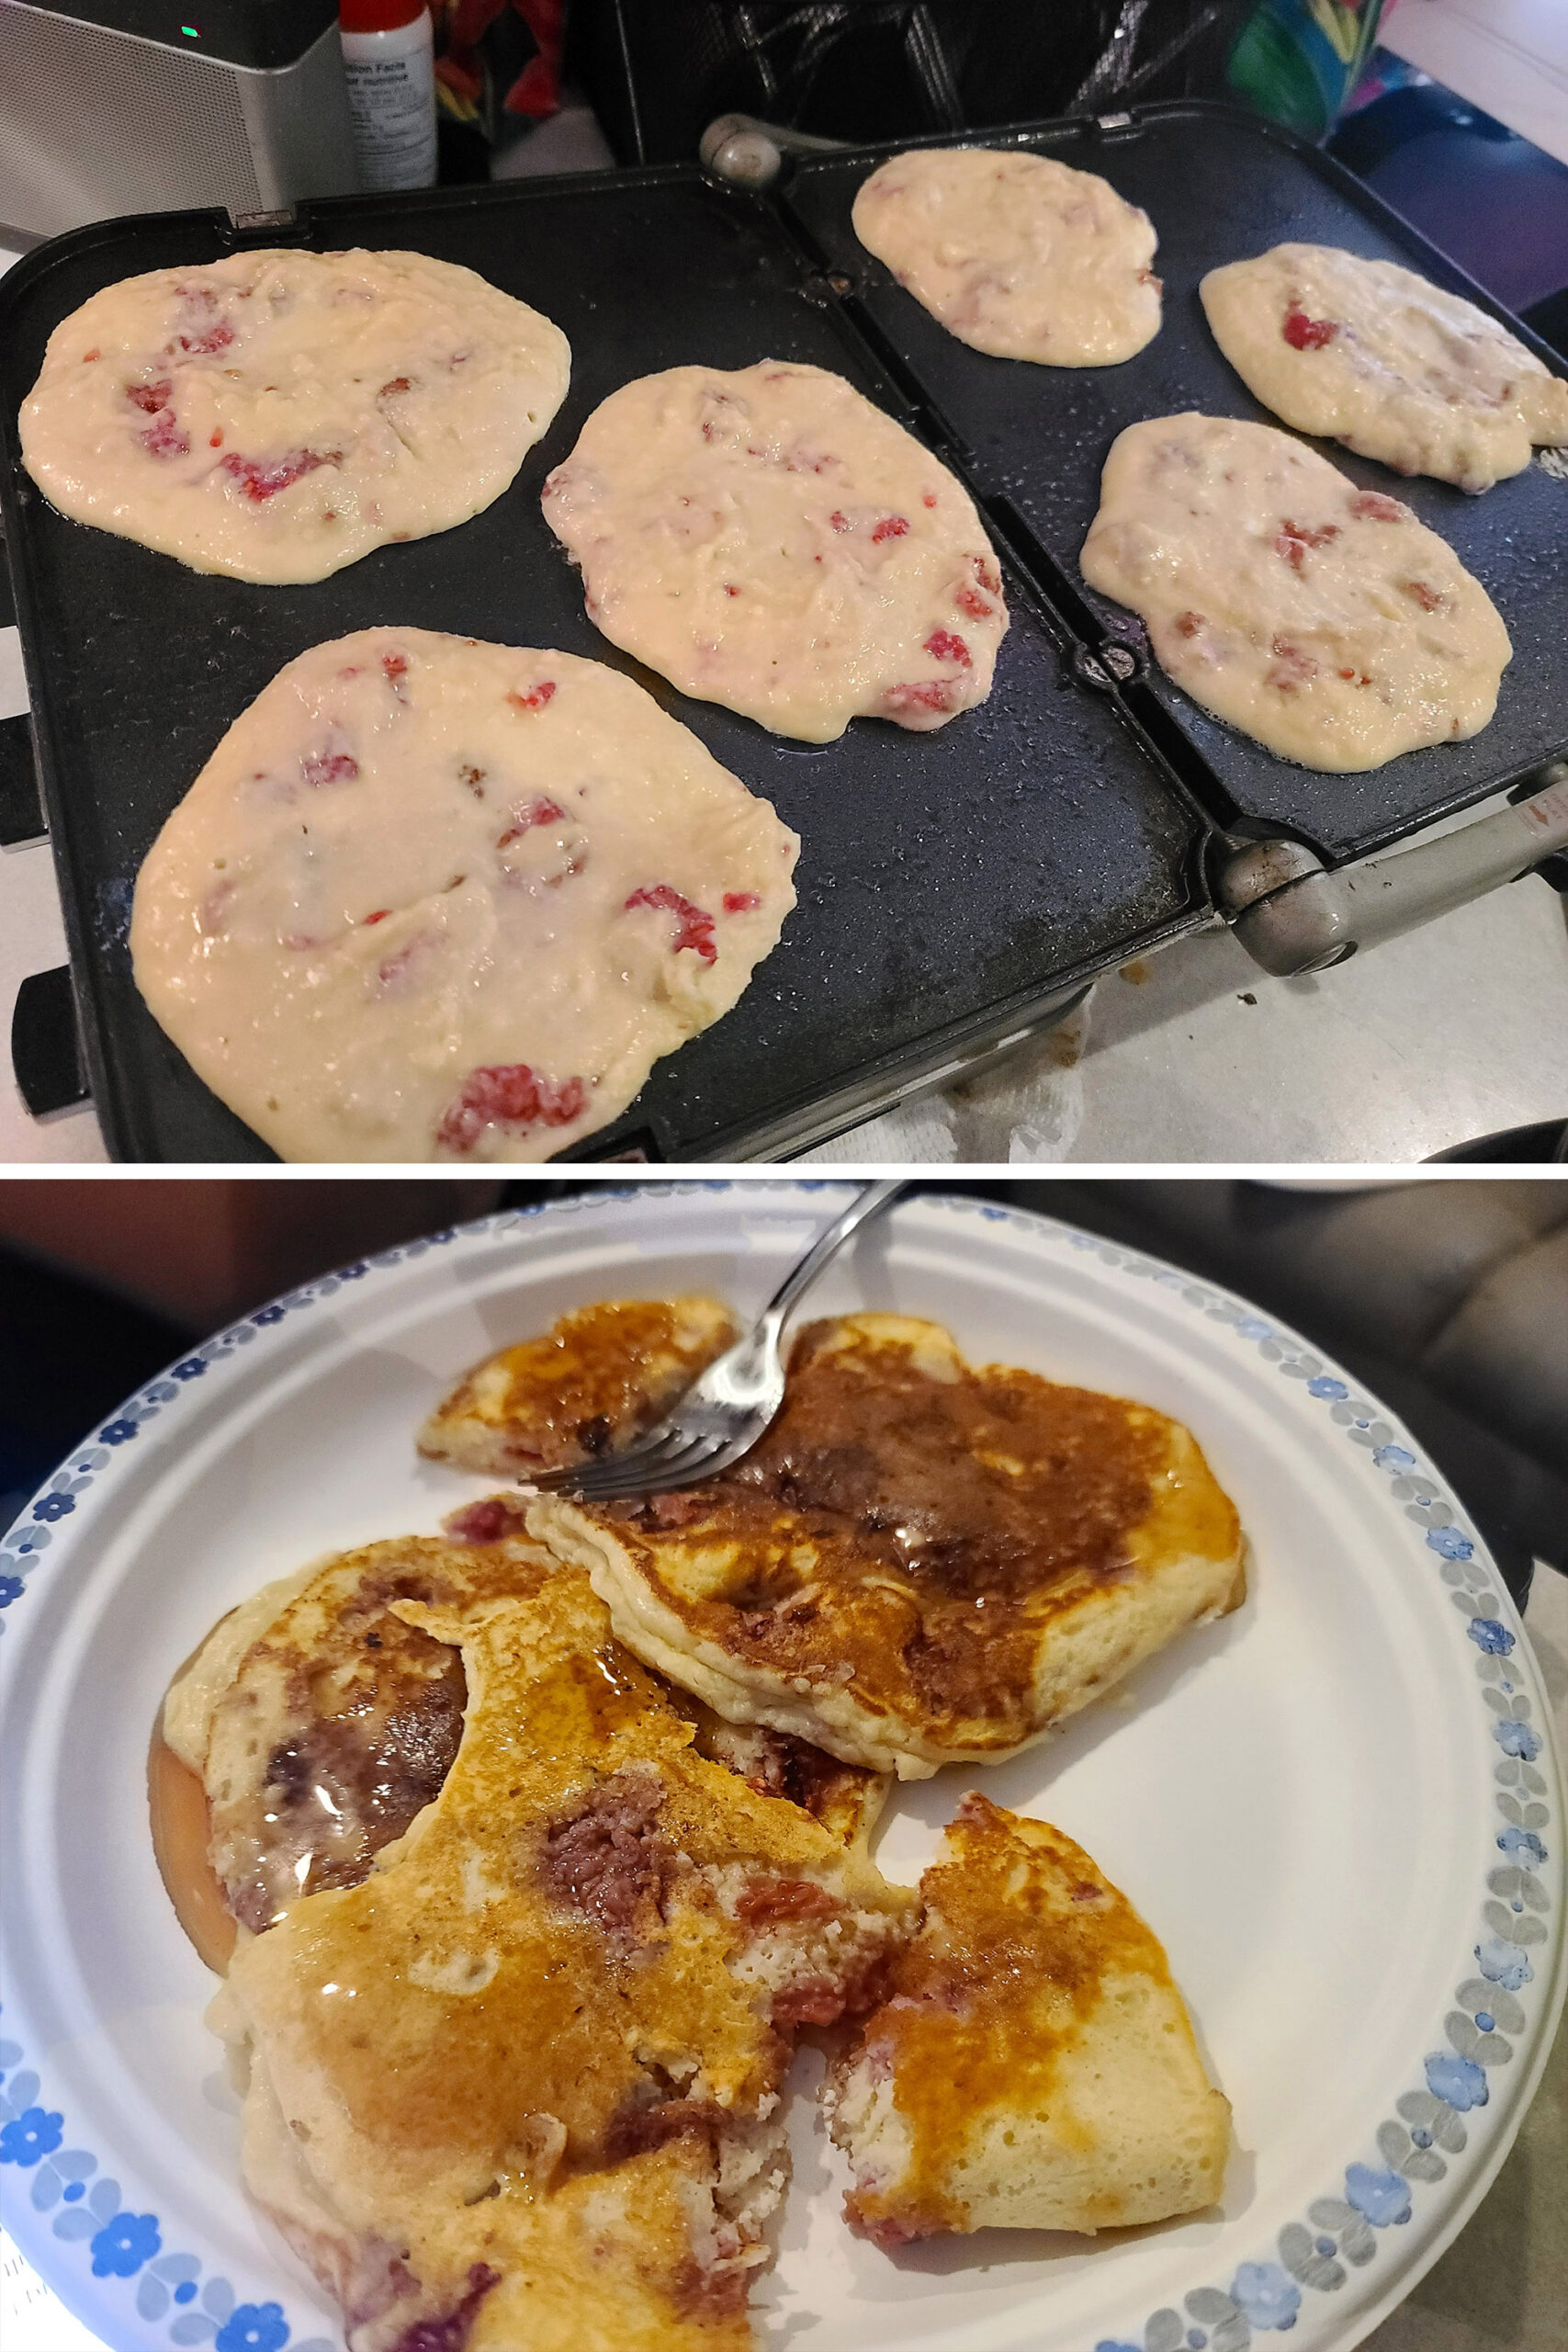 A 2 part image showing pancakes with raspberries in the batter cooking on a griddle, and the finished raspberry pancakes on a paper plate.